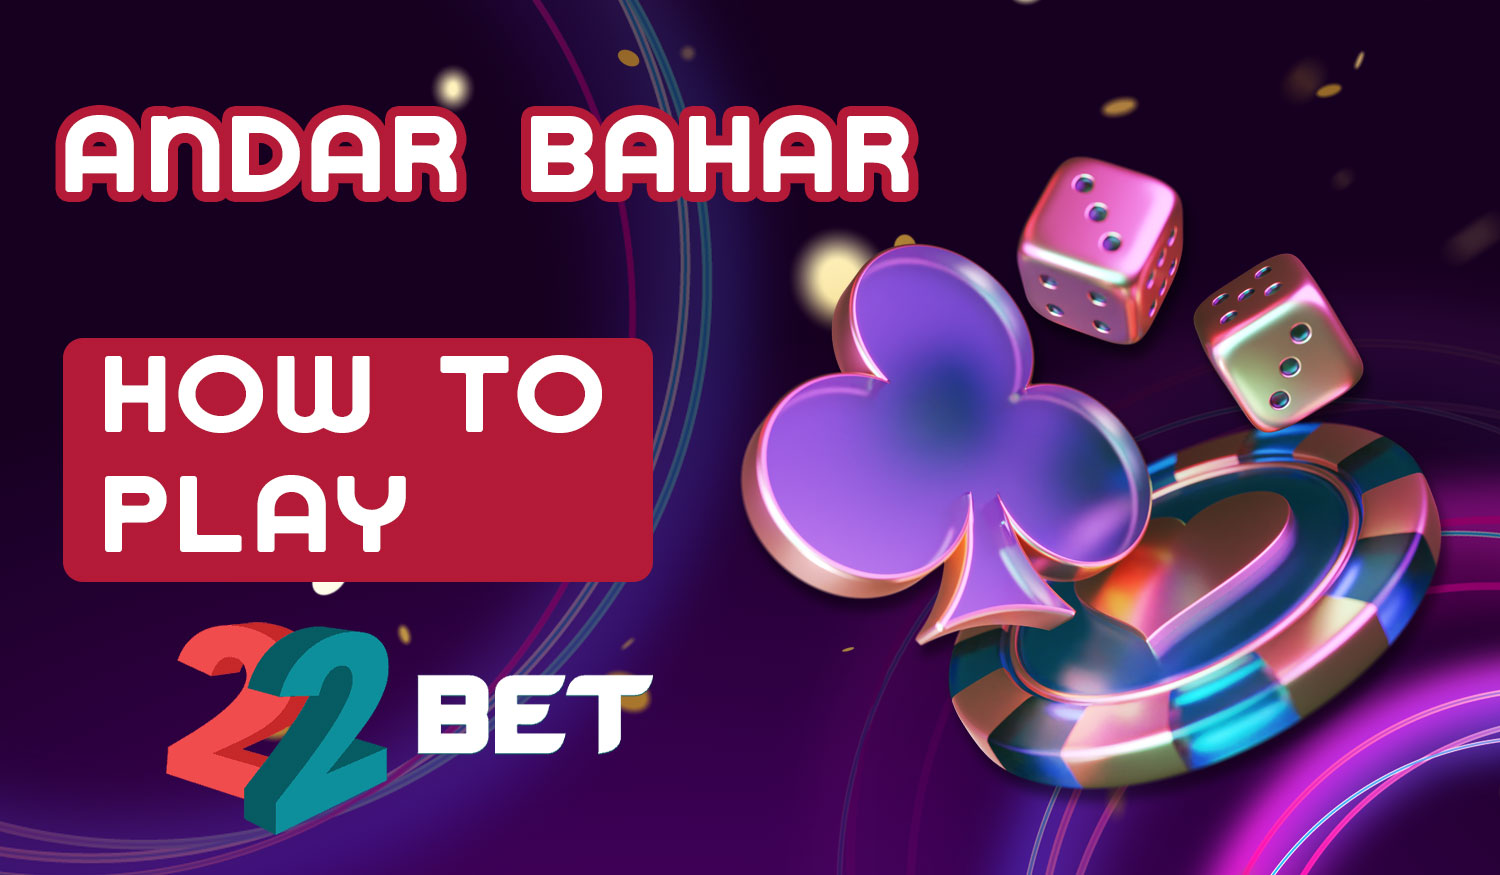 Detailed guide on how to play Andar Bahar on the 22Bet platform in India